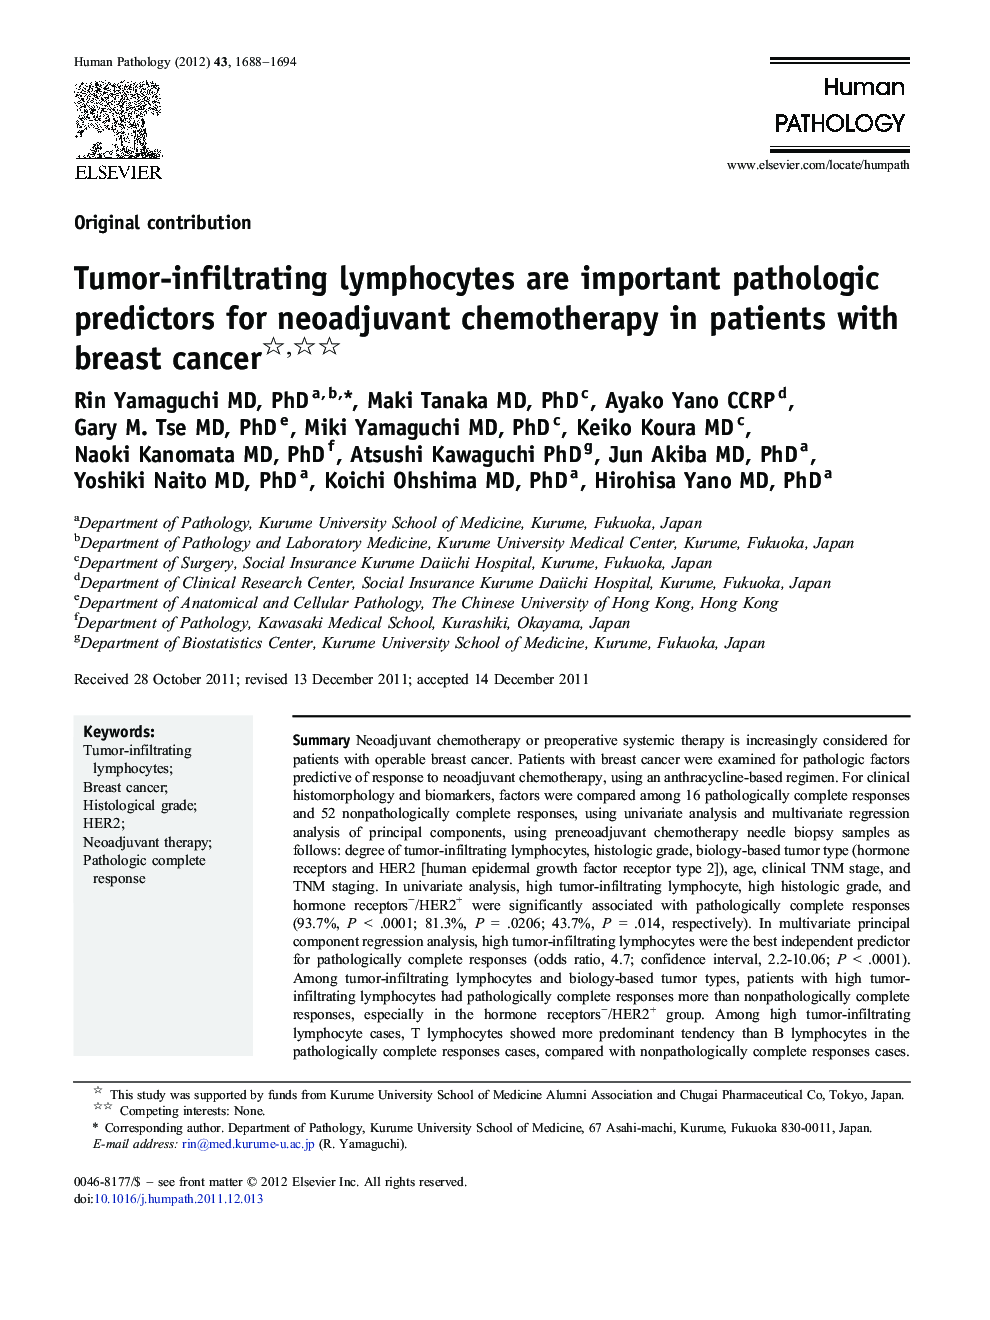 Tumor-infiltrating lymphocytes are important pathologic predictors for neoadjuvant chemotherapy in patients with breast cancer 